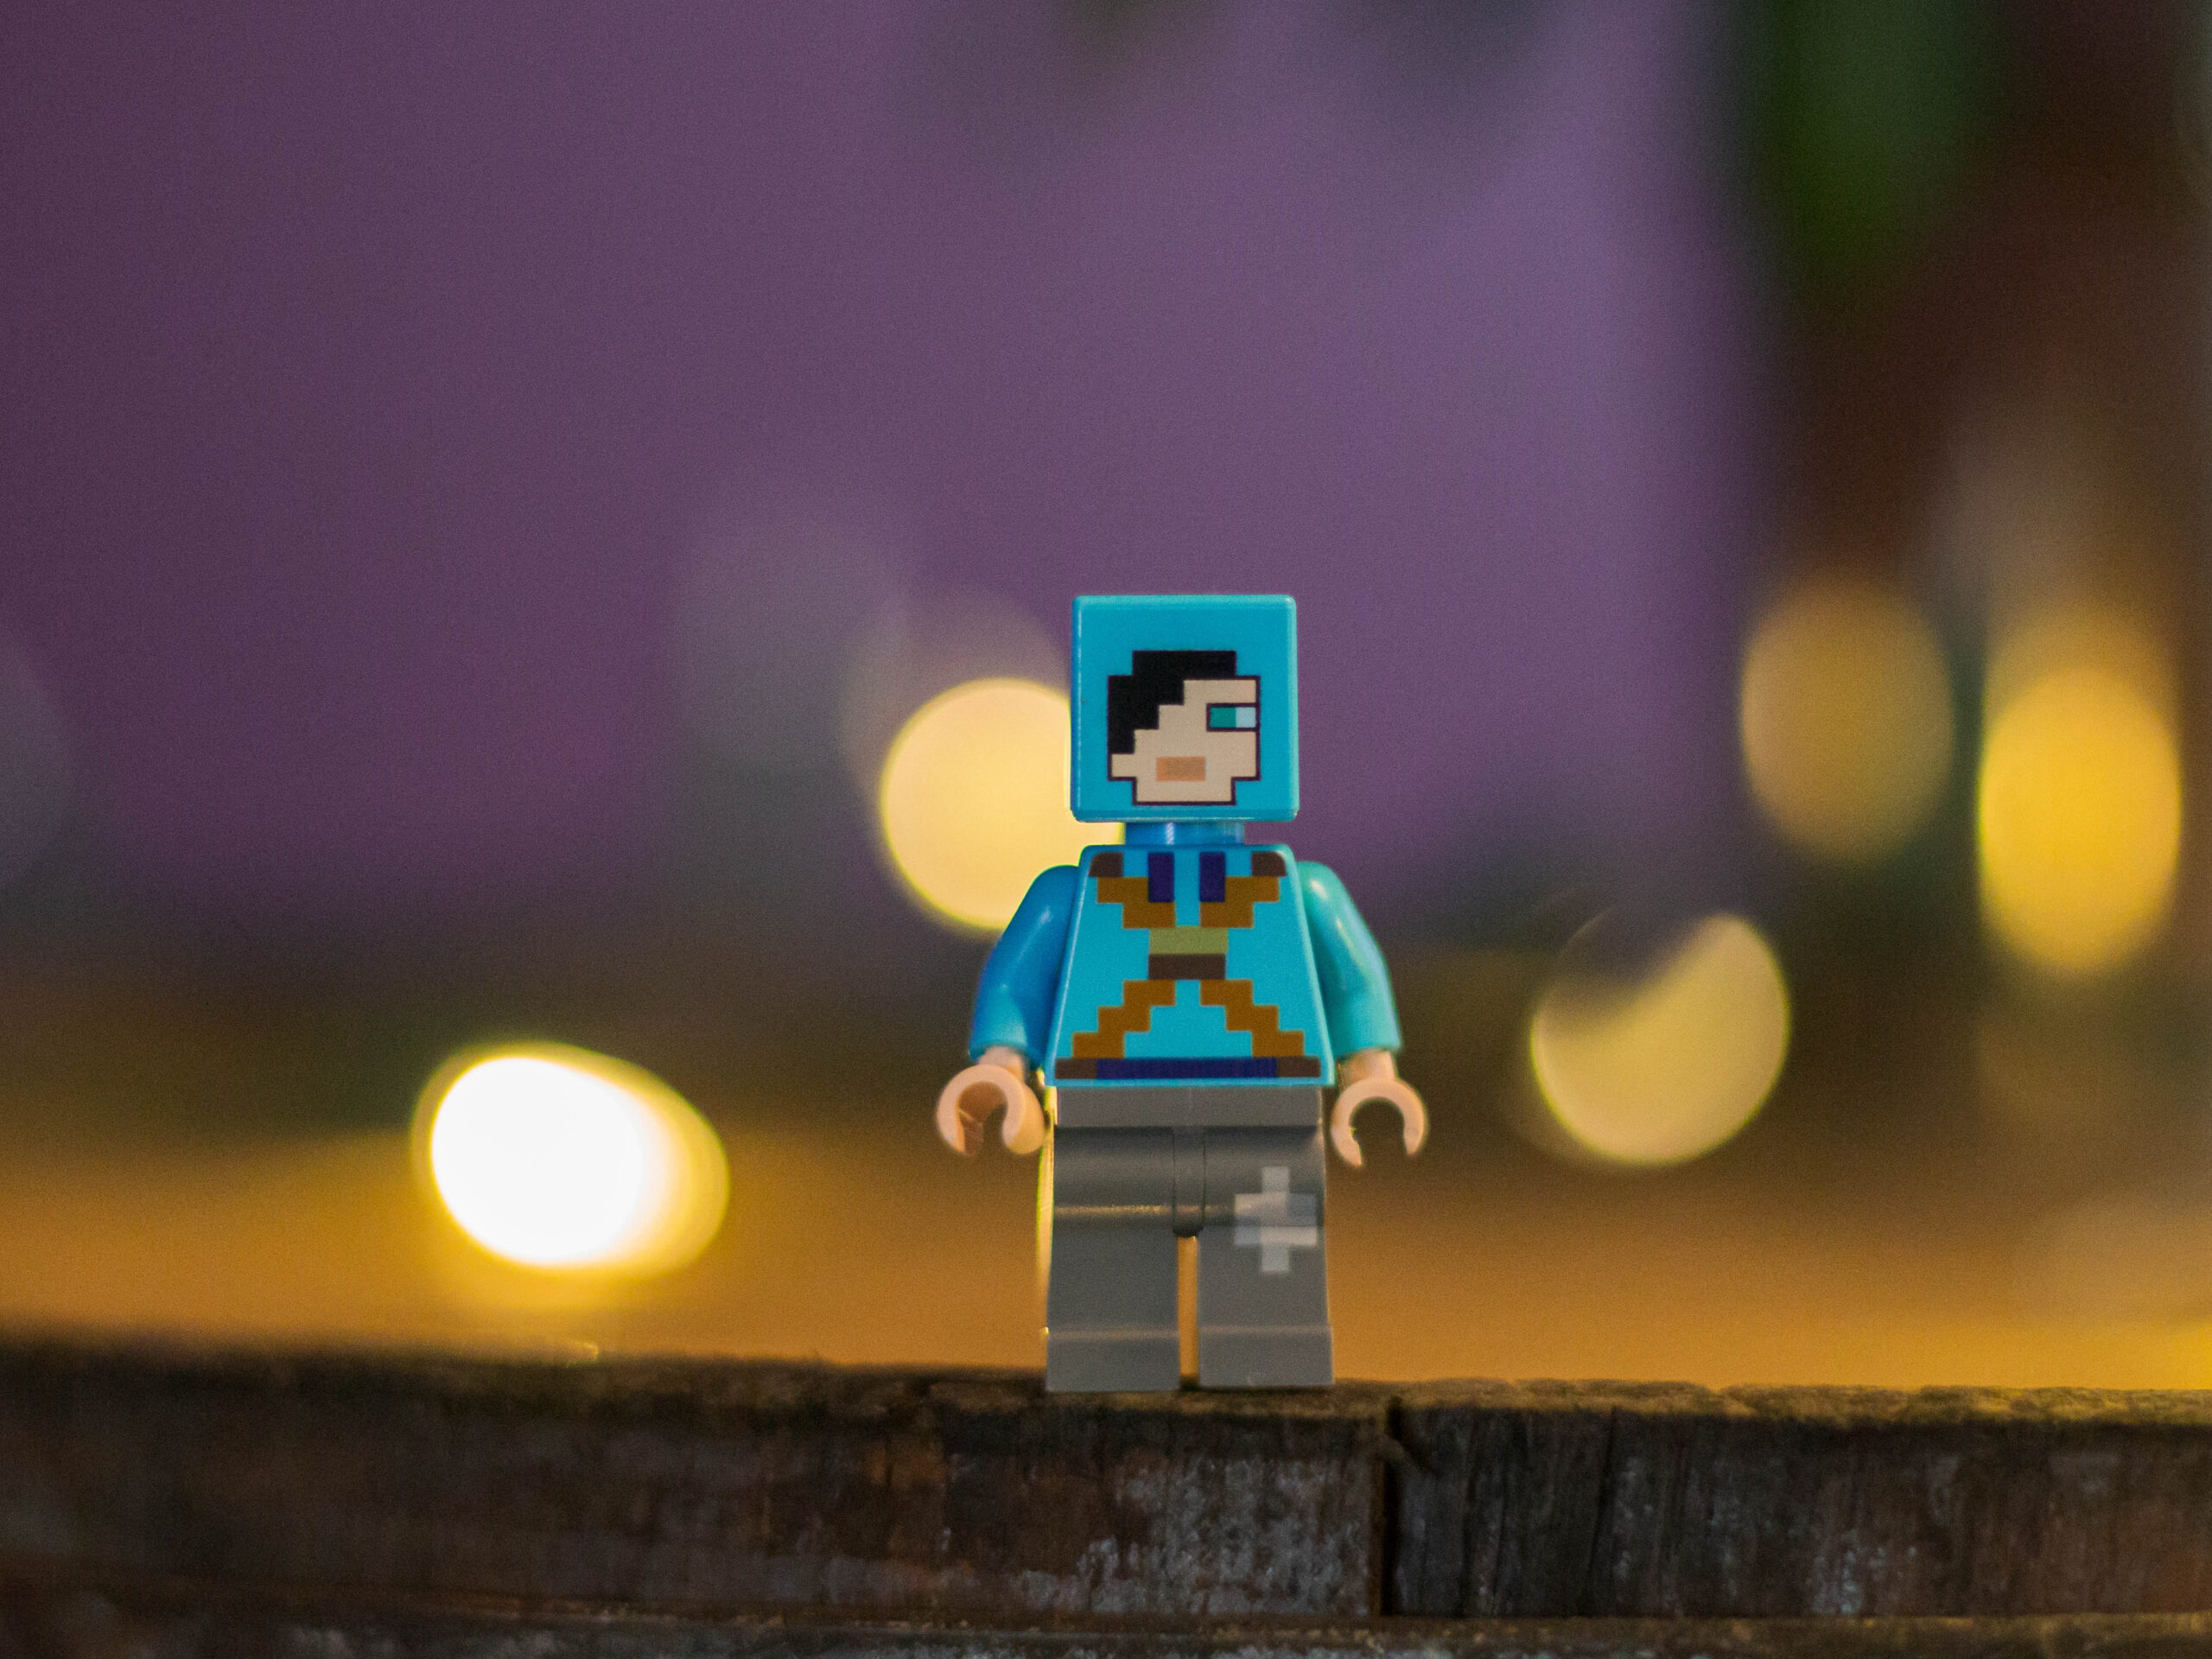 Blue lego figure with a block head standing on a piece of wood in front of lights